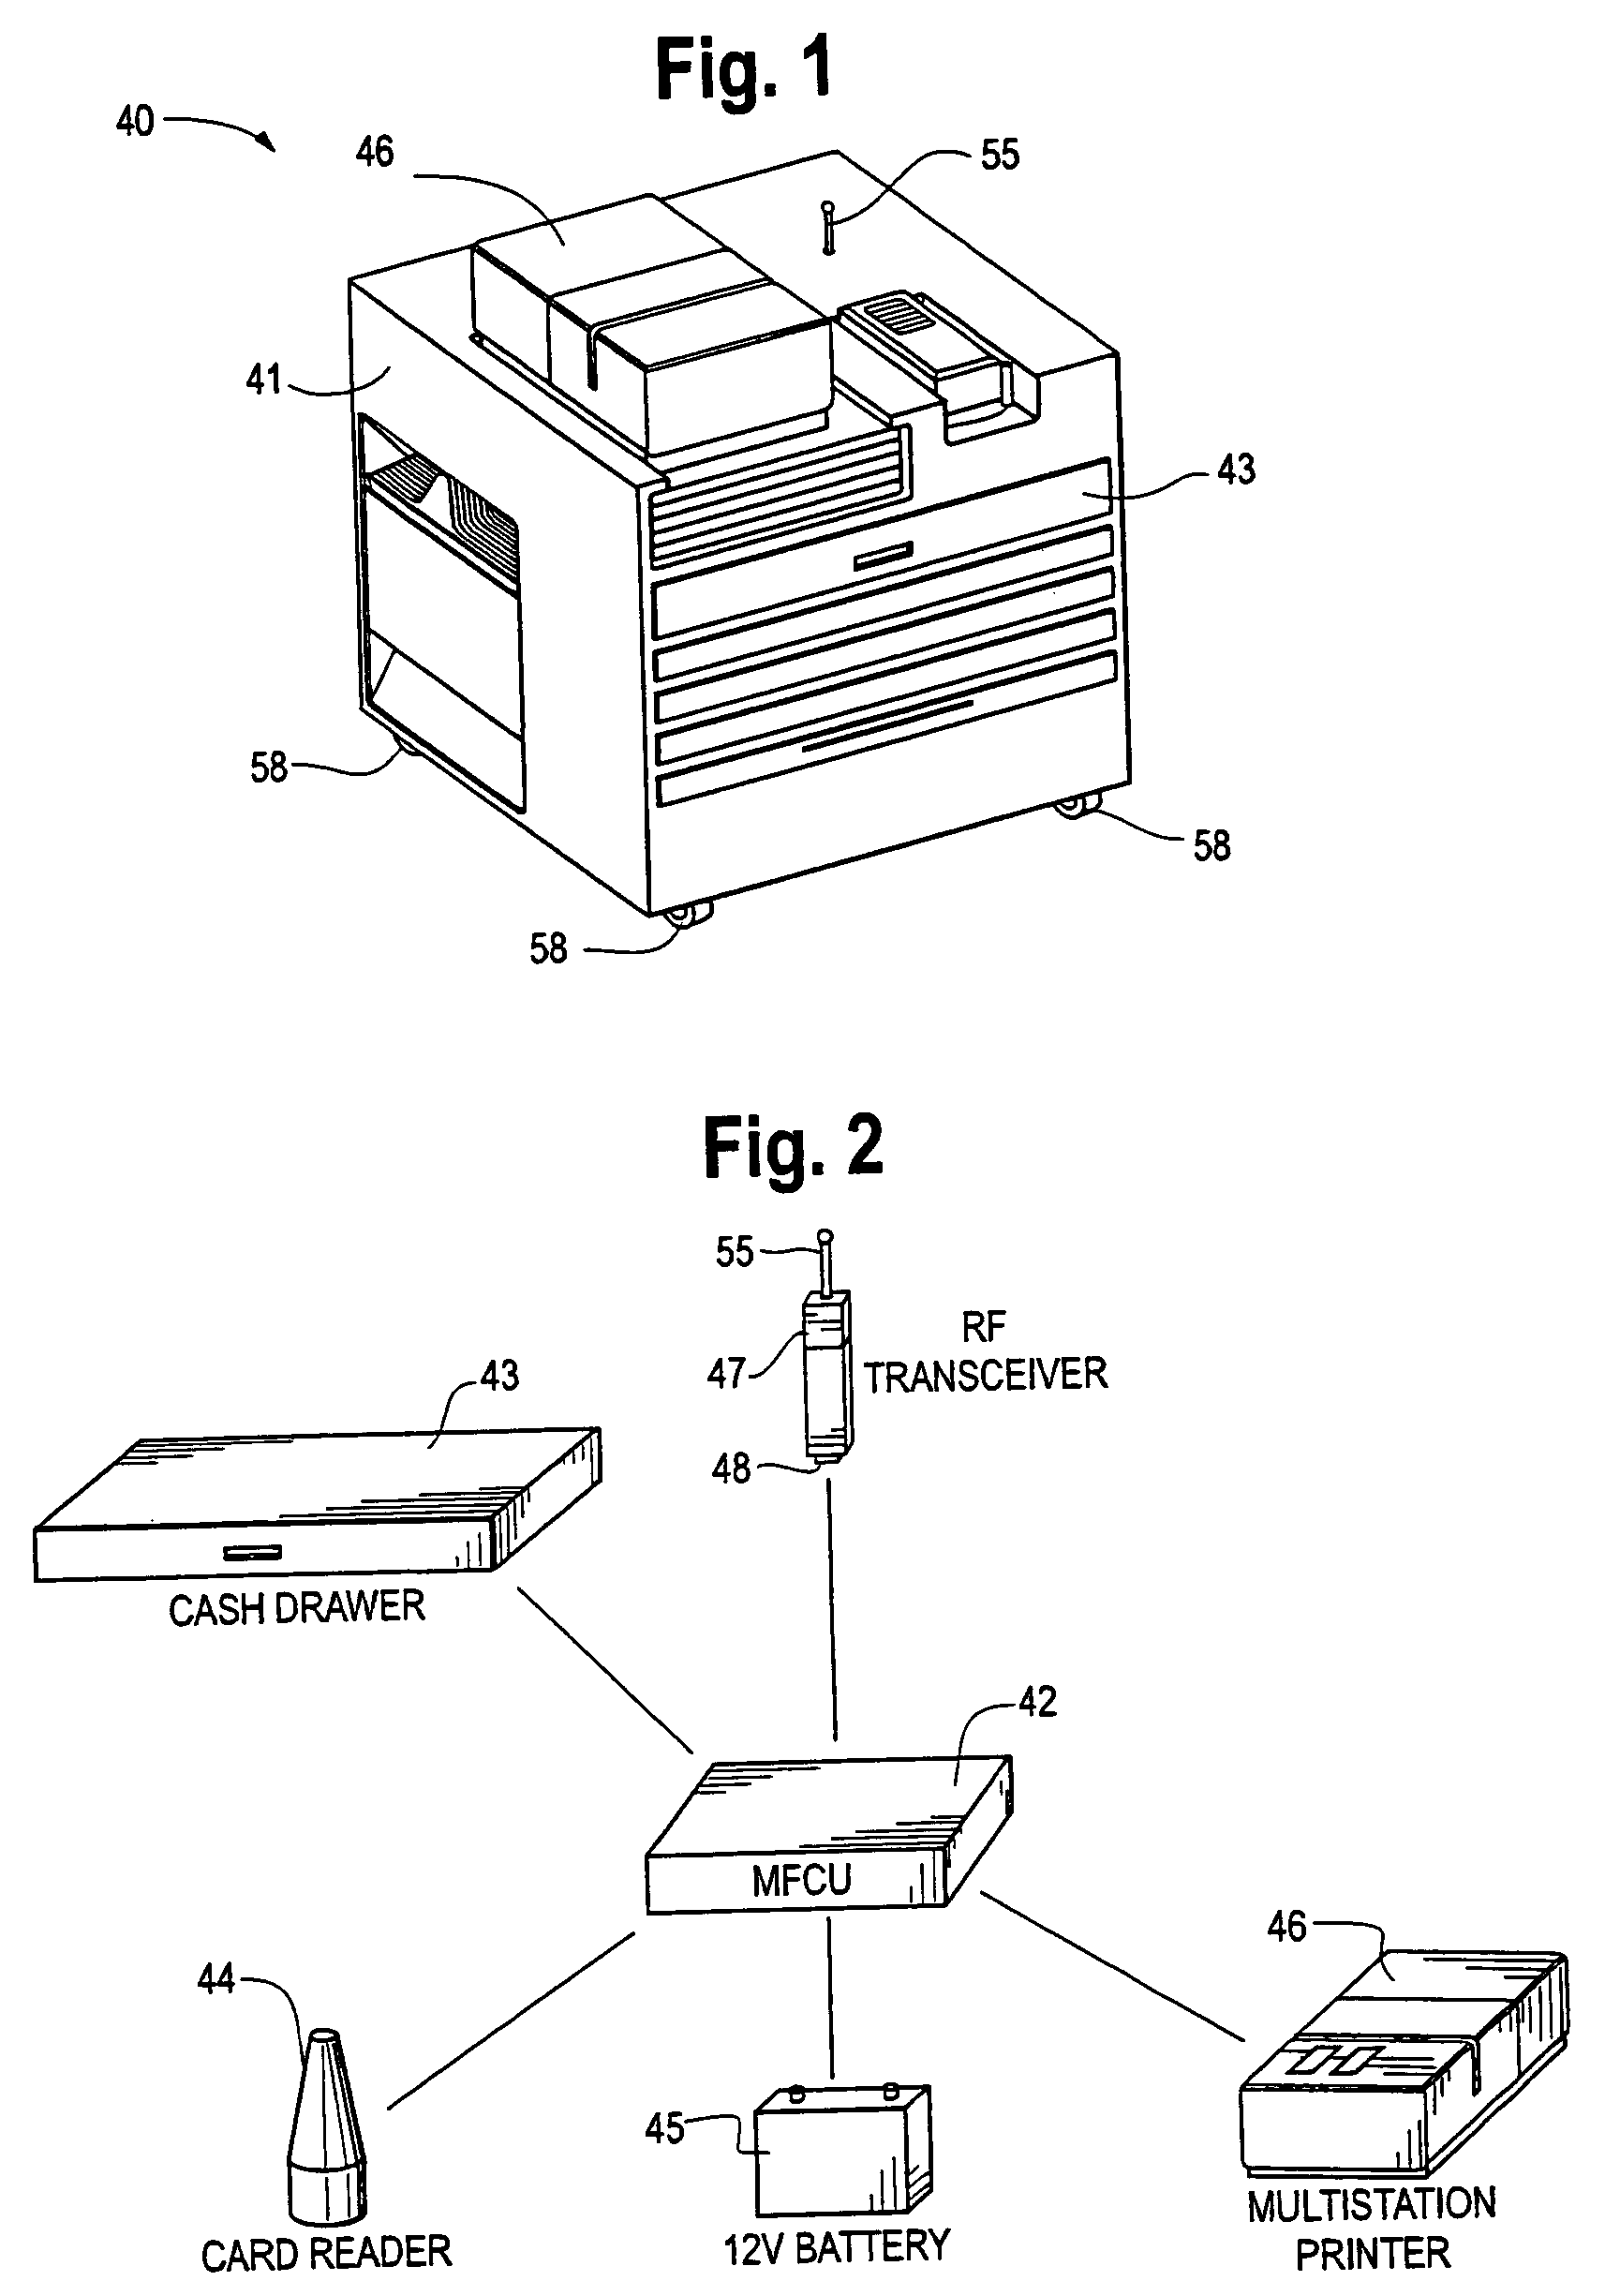 Transaction control system including portable data terminal and mobile customer service station